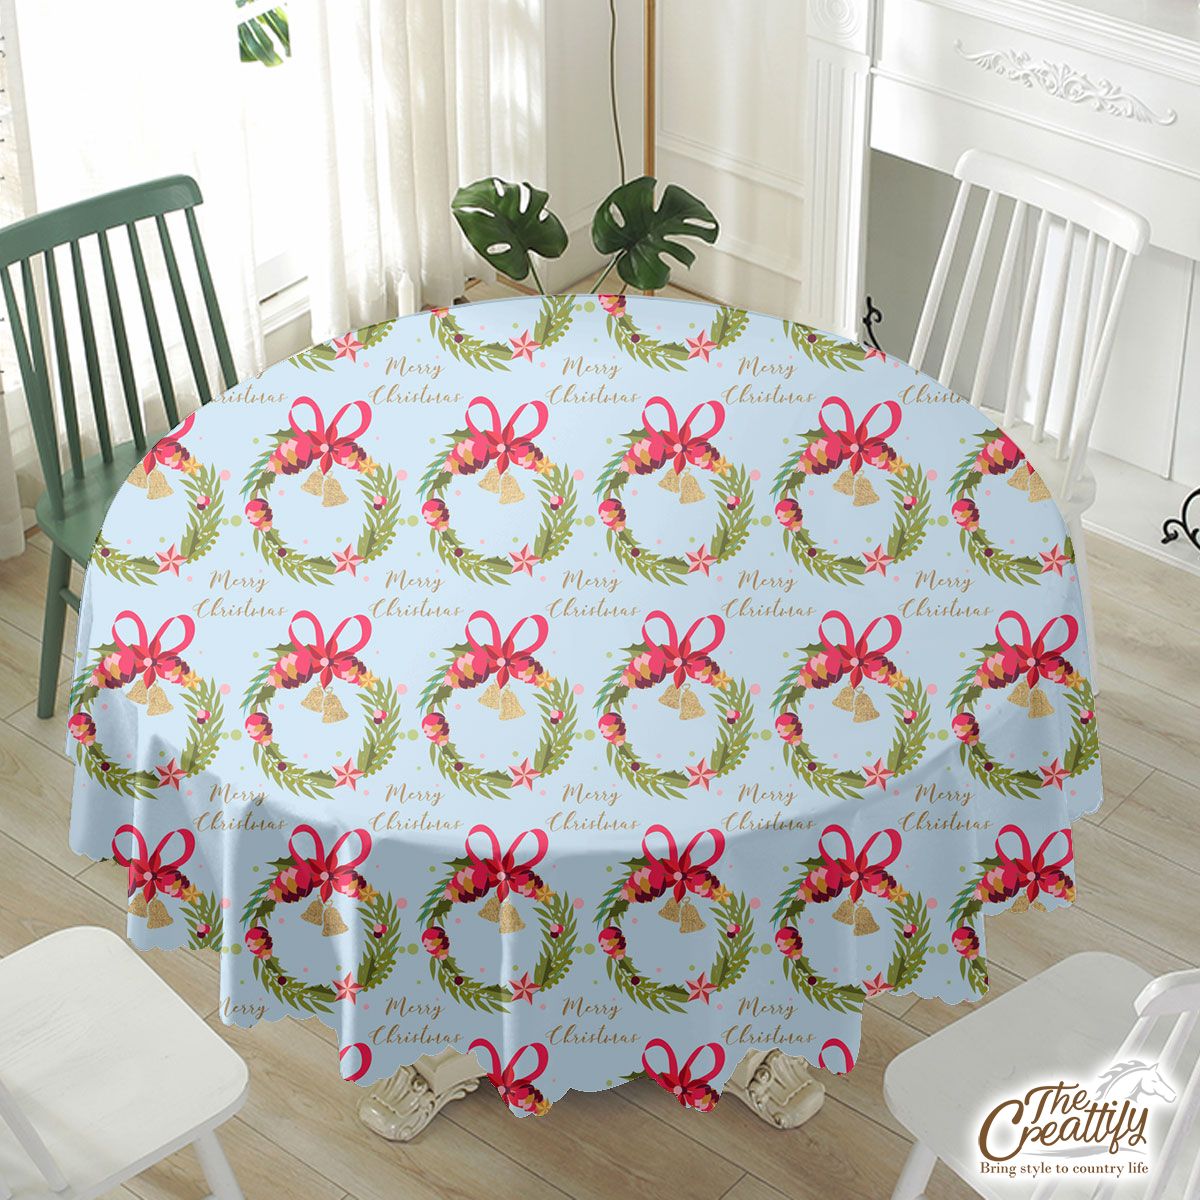 Christmas Wreath, Christmas Wreath Bows And Bells Waterproof Tablecloth